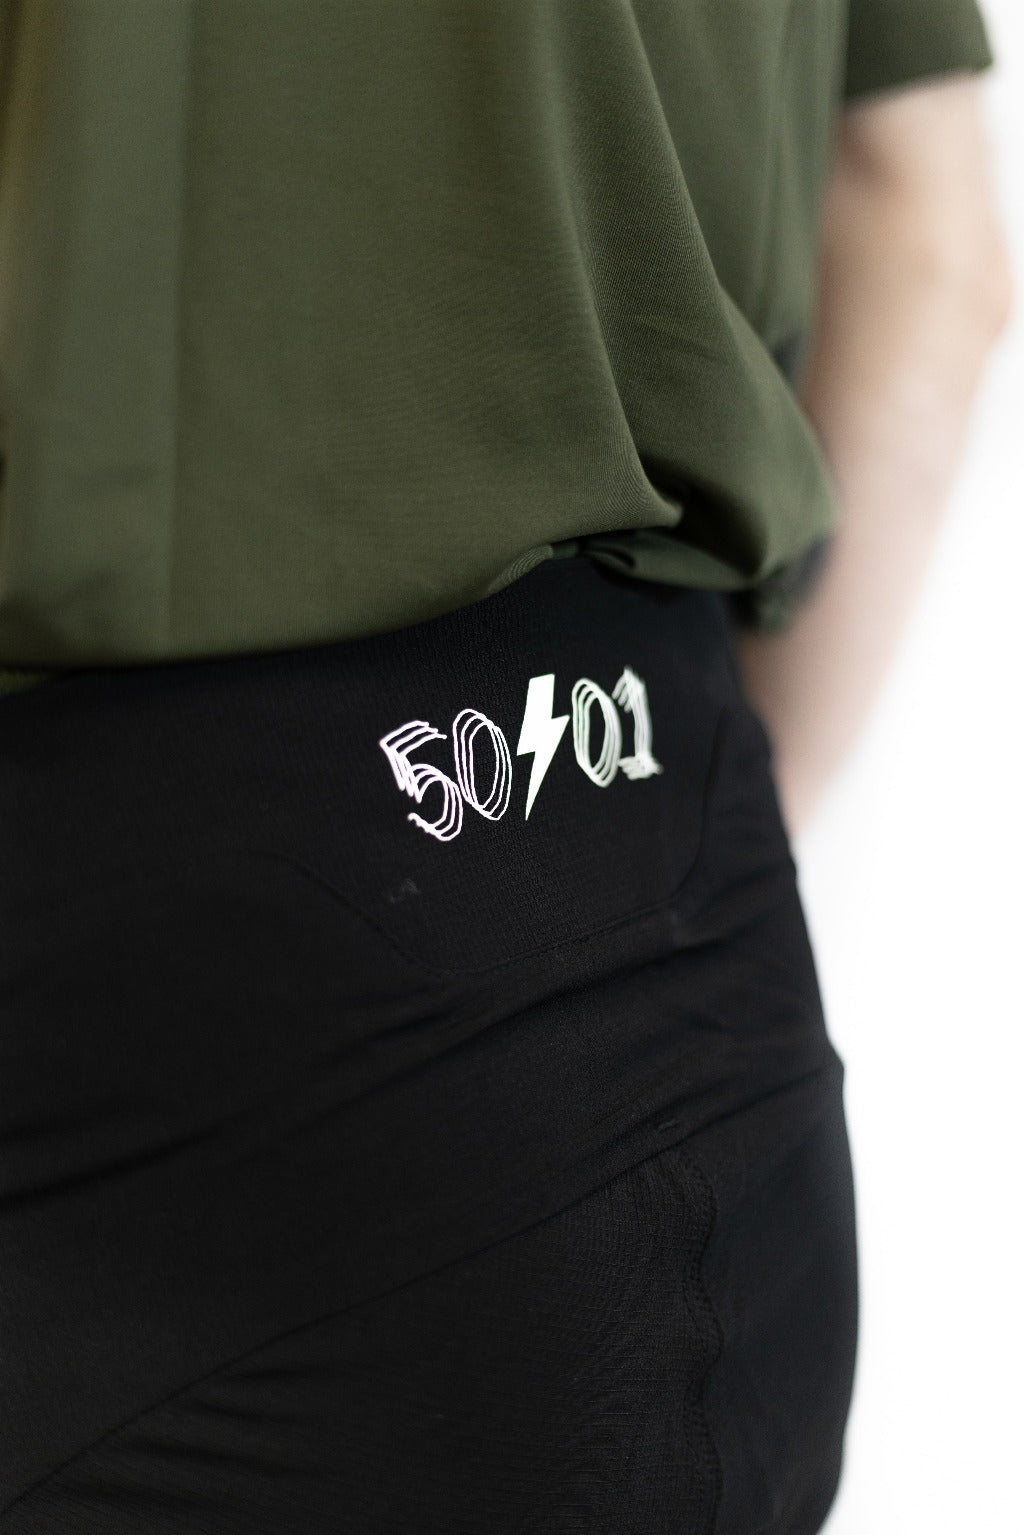 50to01 - ALL DAY MTB PANTS BLACK